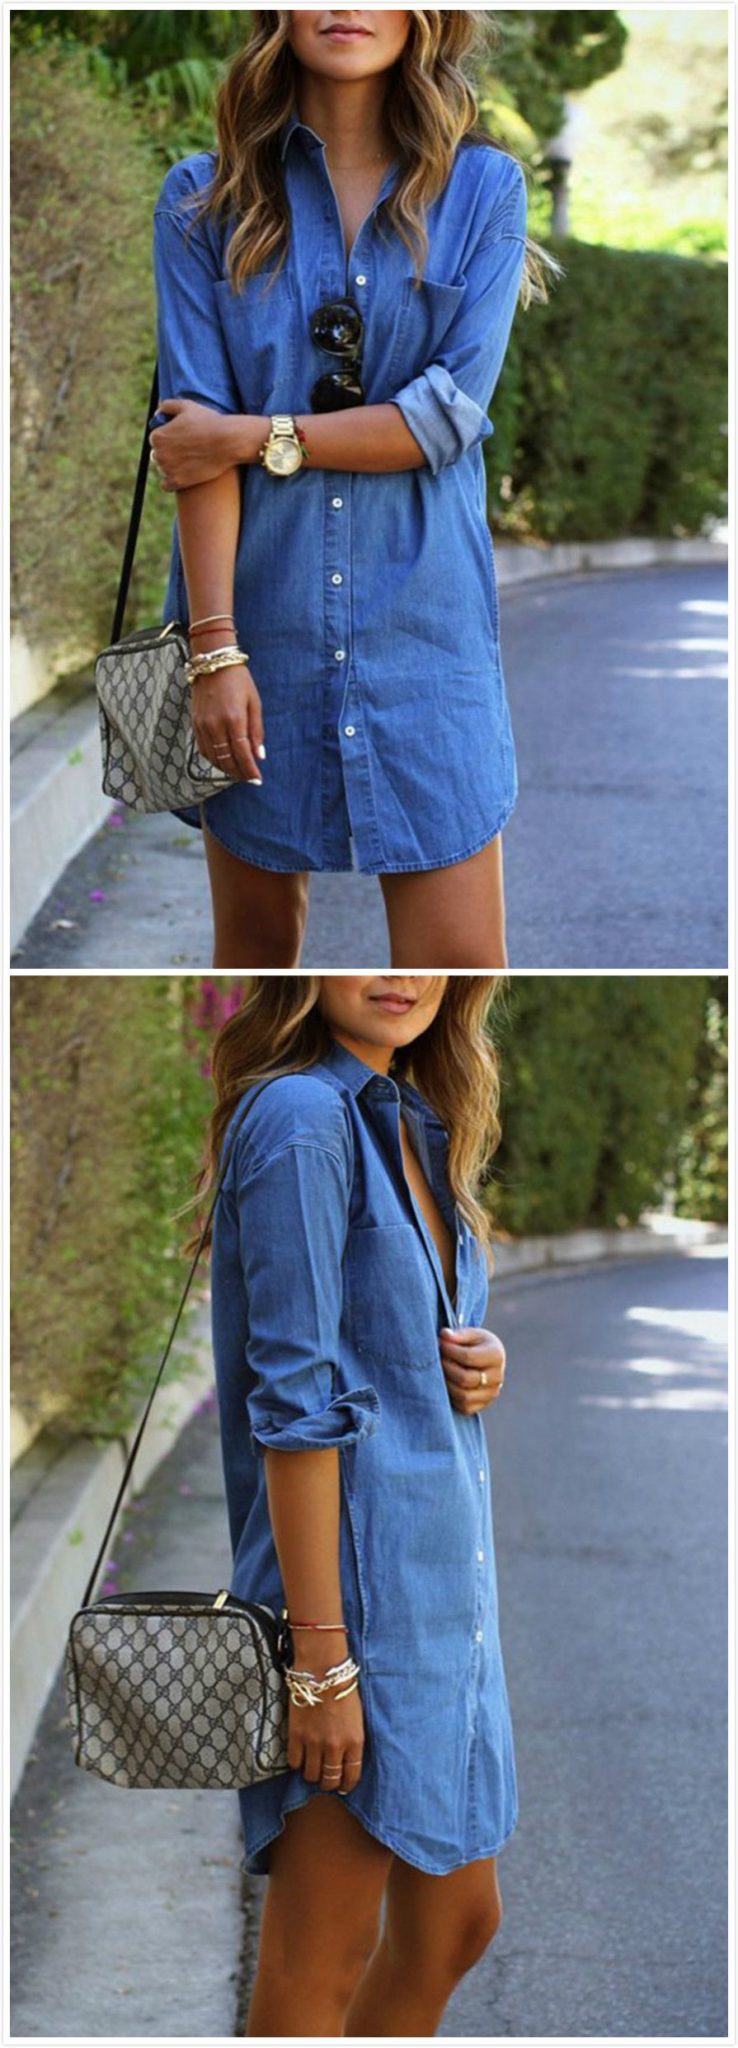 39 Simple Ways To Wear A Shirt Dresses – Eazy Glam